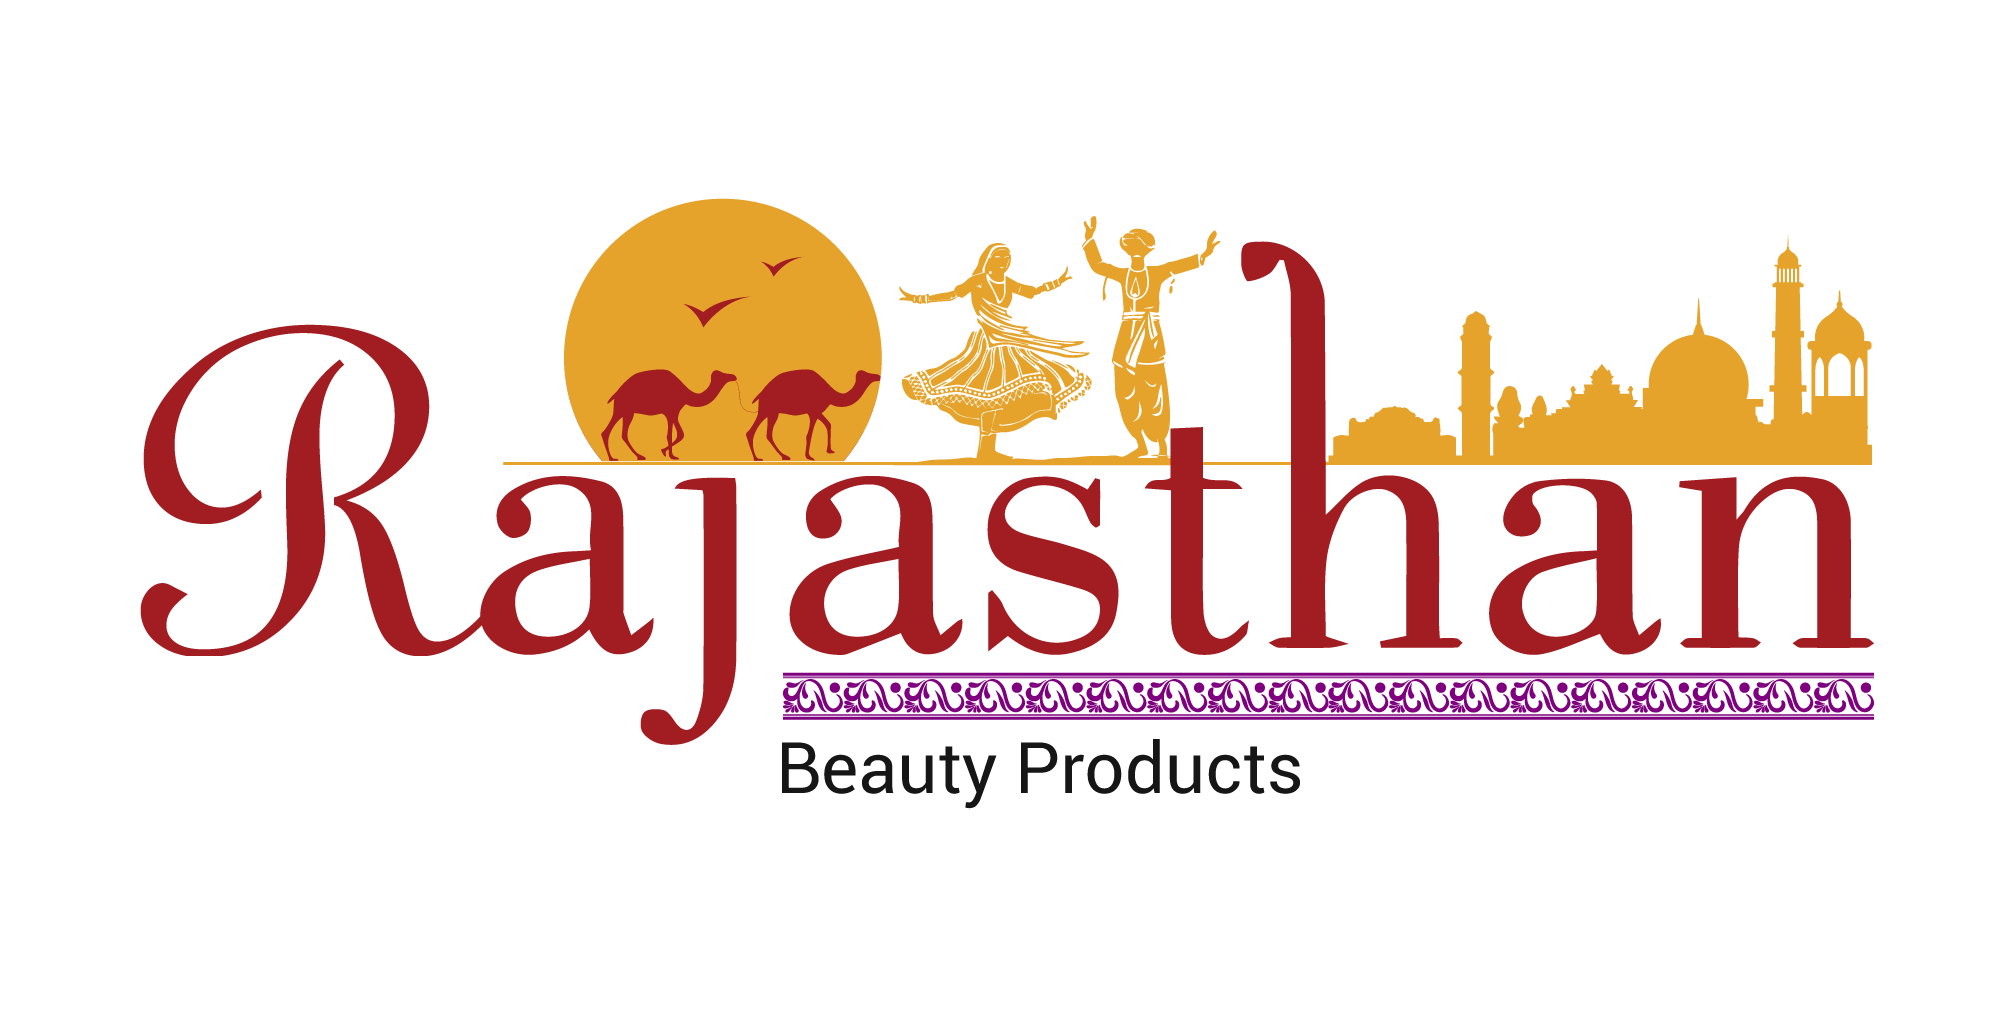 Rajasthan Beauty Products